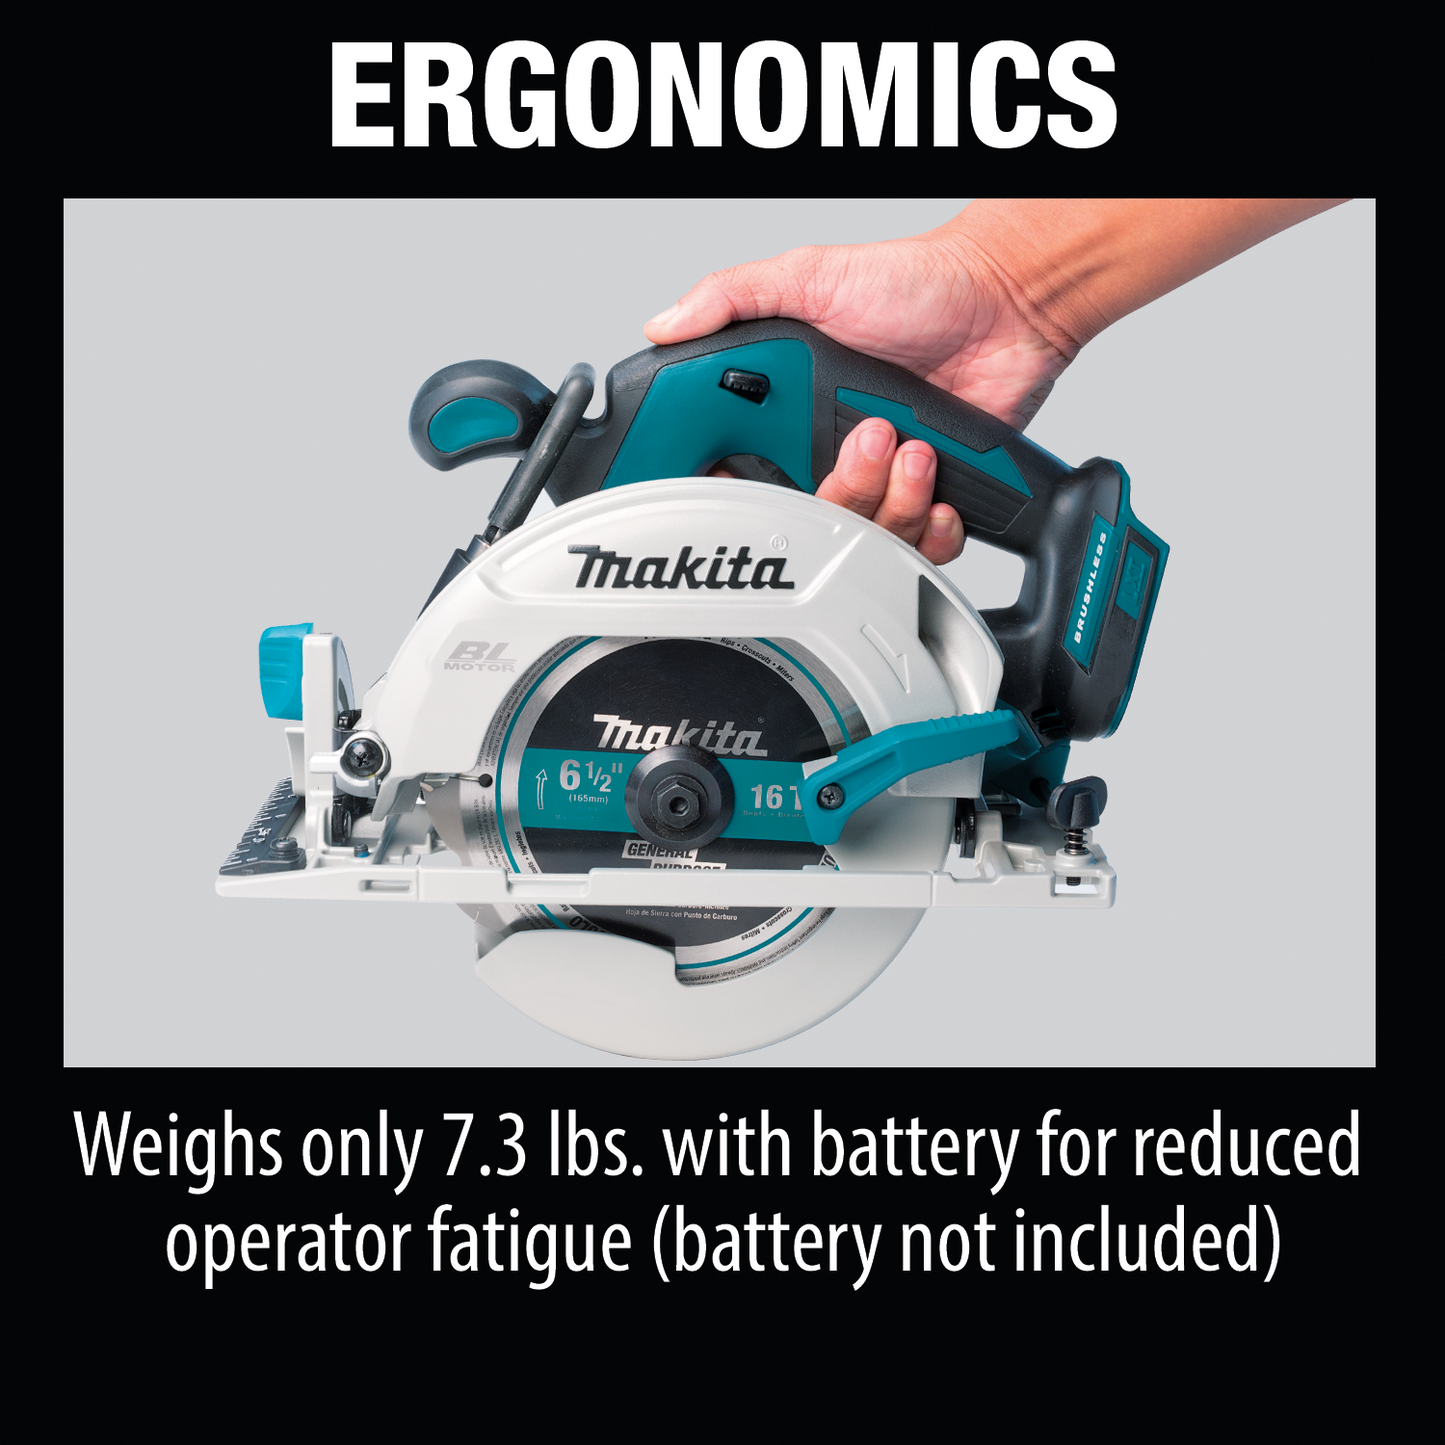 Makita 18V 6.5 Inch Brushless Cordless Circular Saw Factory Serviced (Tool Only)